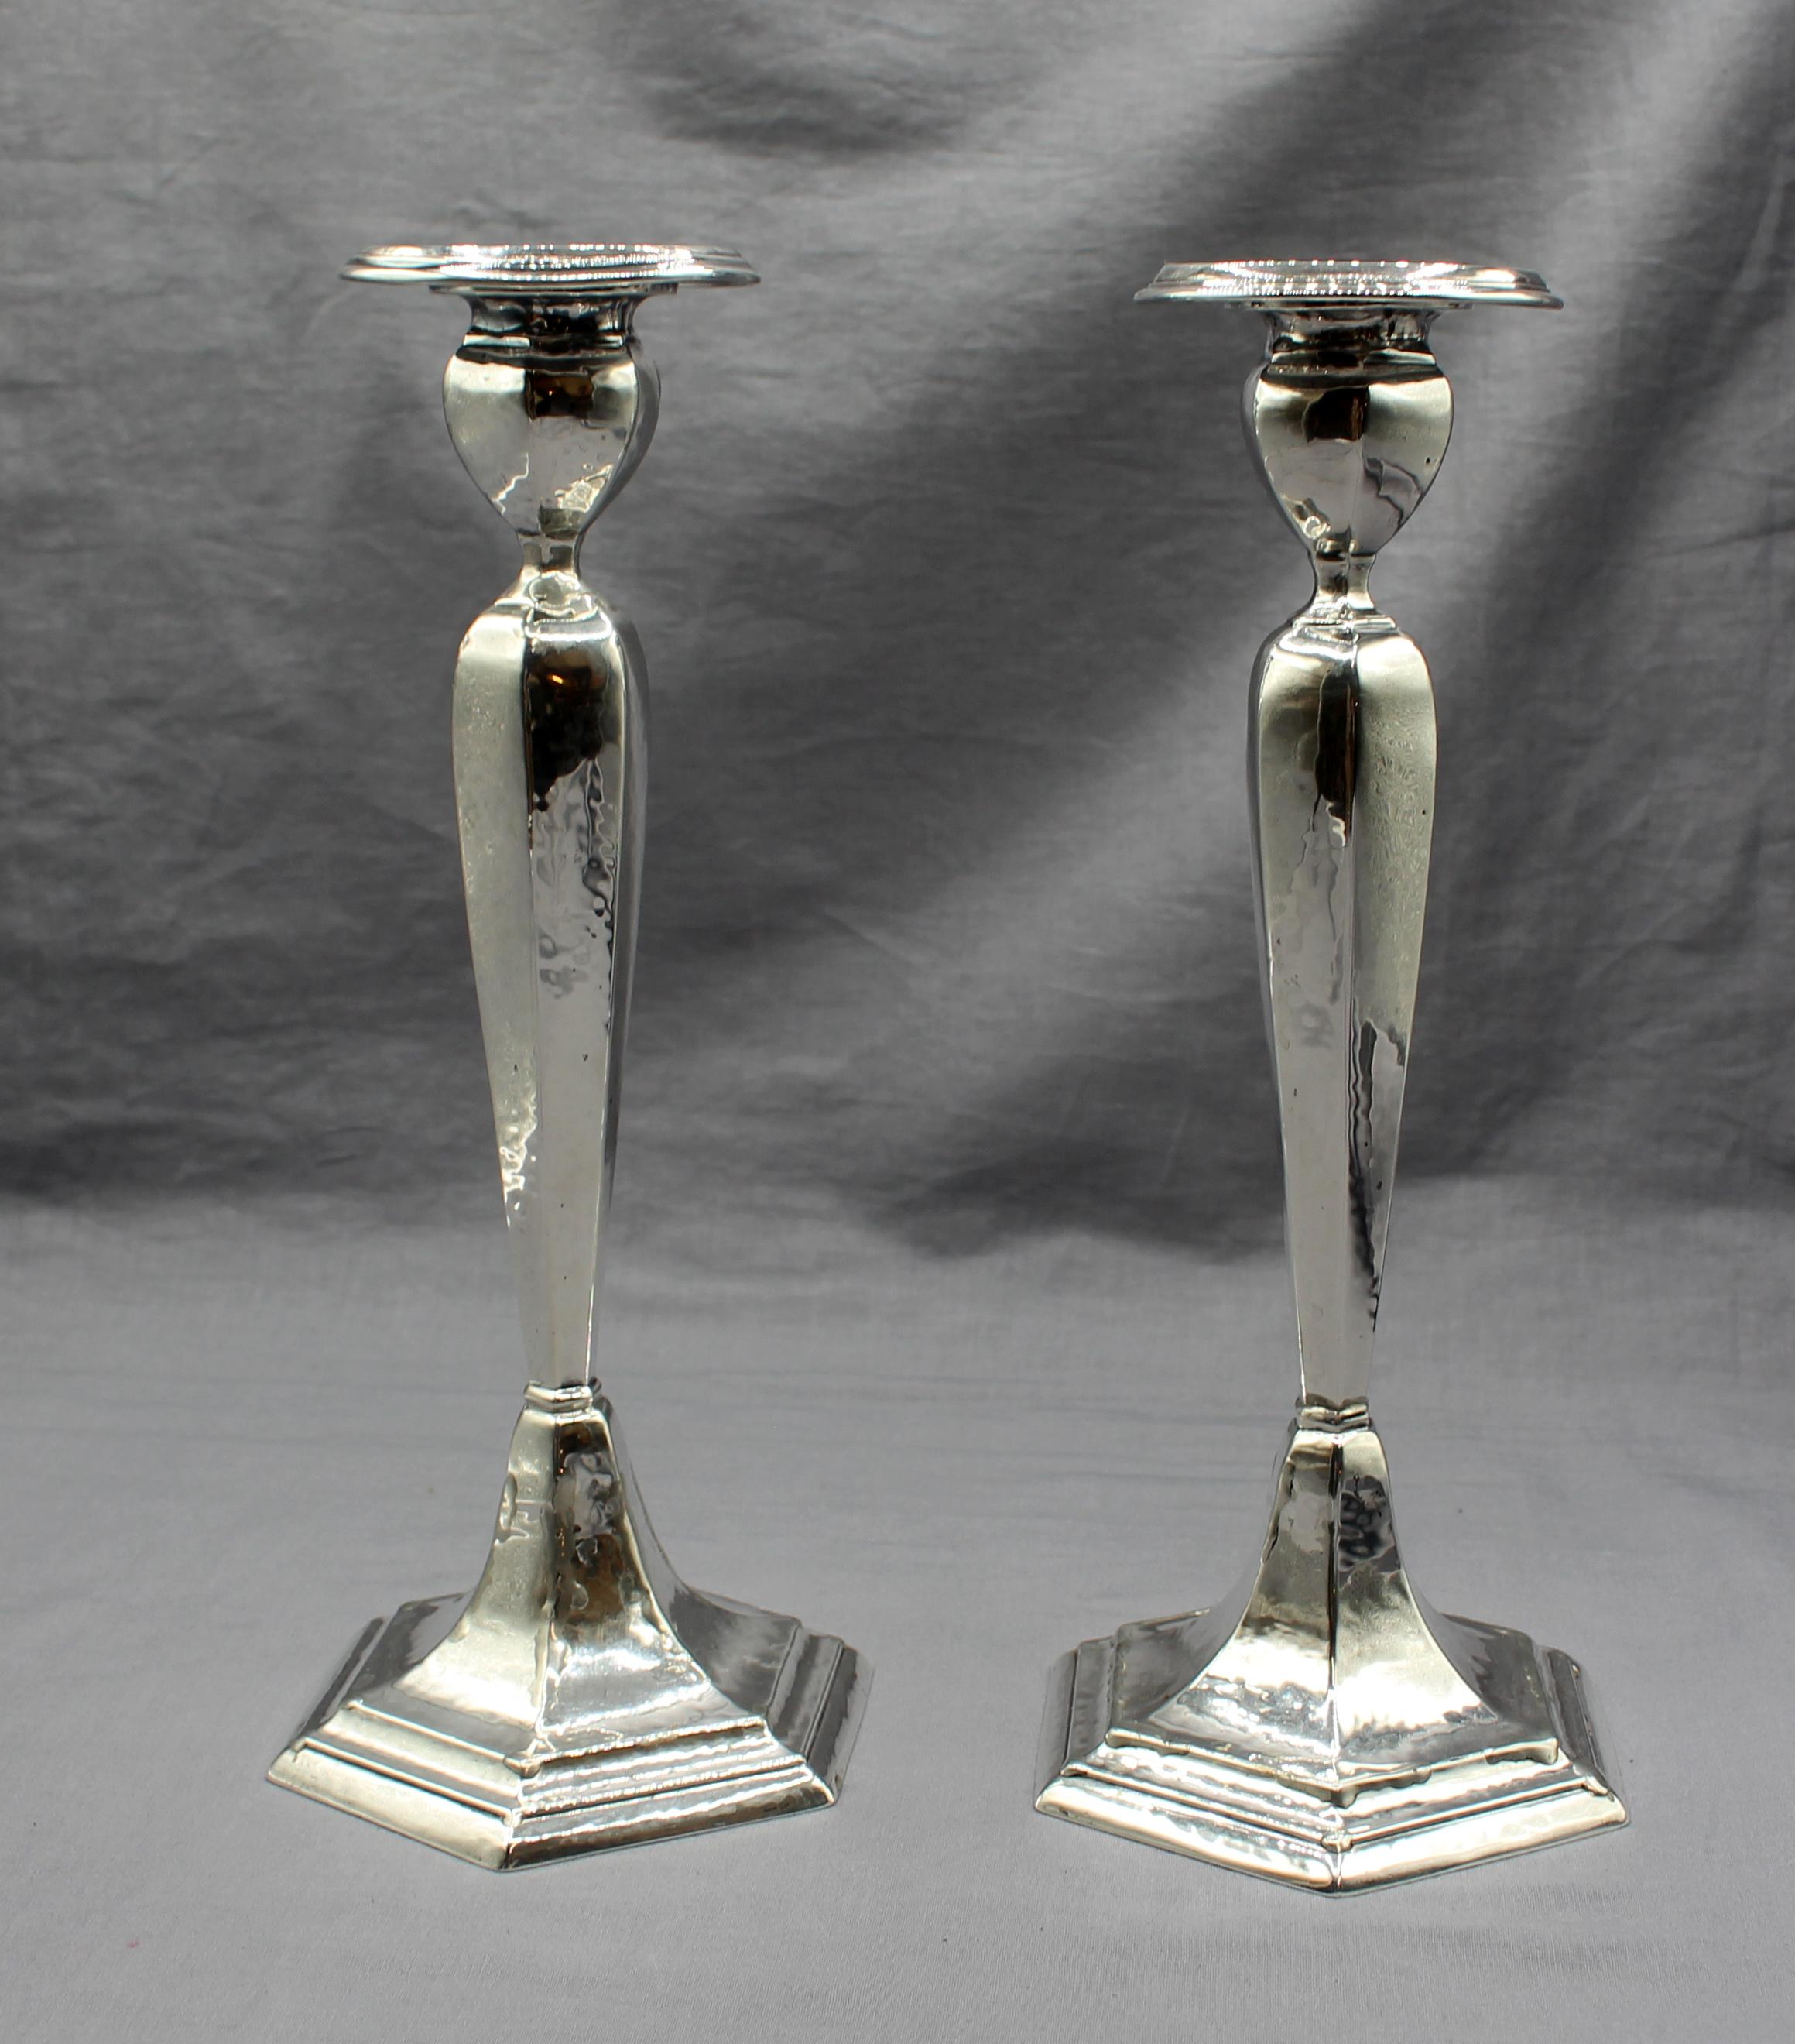 A pair of sterling silver weighted candlesticks by International, circa 1920s. Marked: Hand Hammered, Pitch Loaded Wood Reinforced. Hexagonal bases rise to circular bobeche. One with extensive professional repairs. Bobeche slightly wrinkly which may